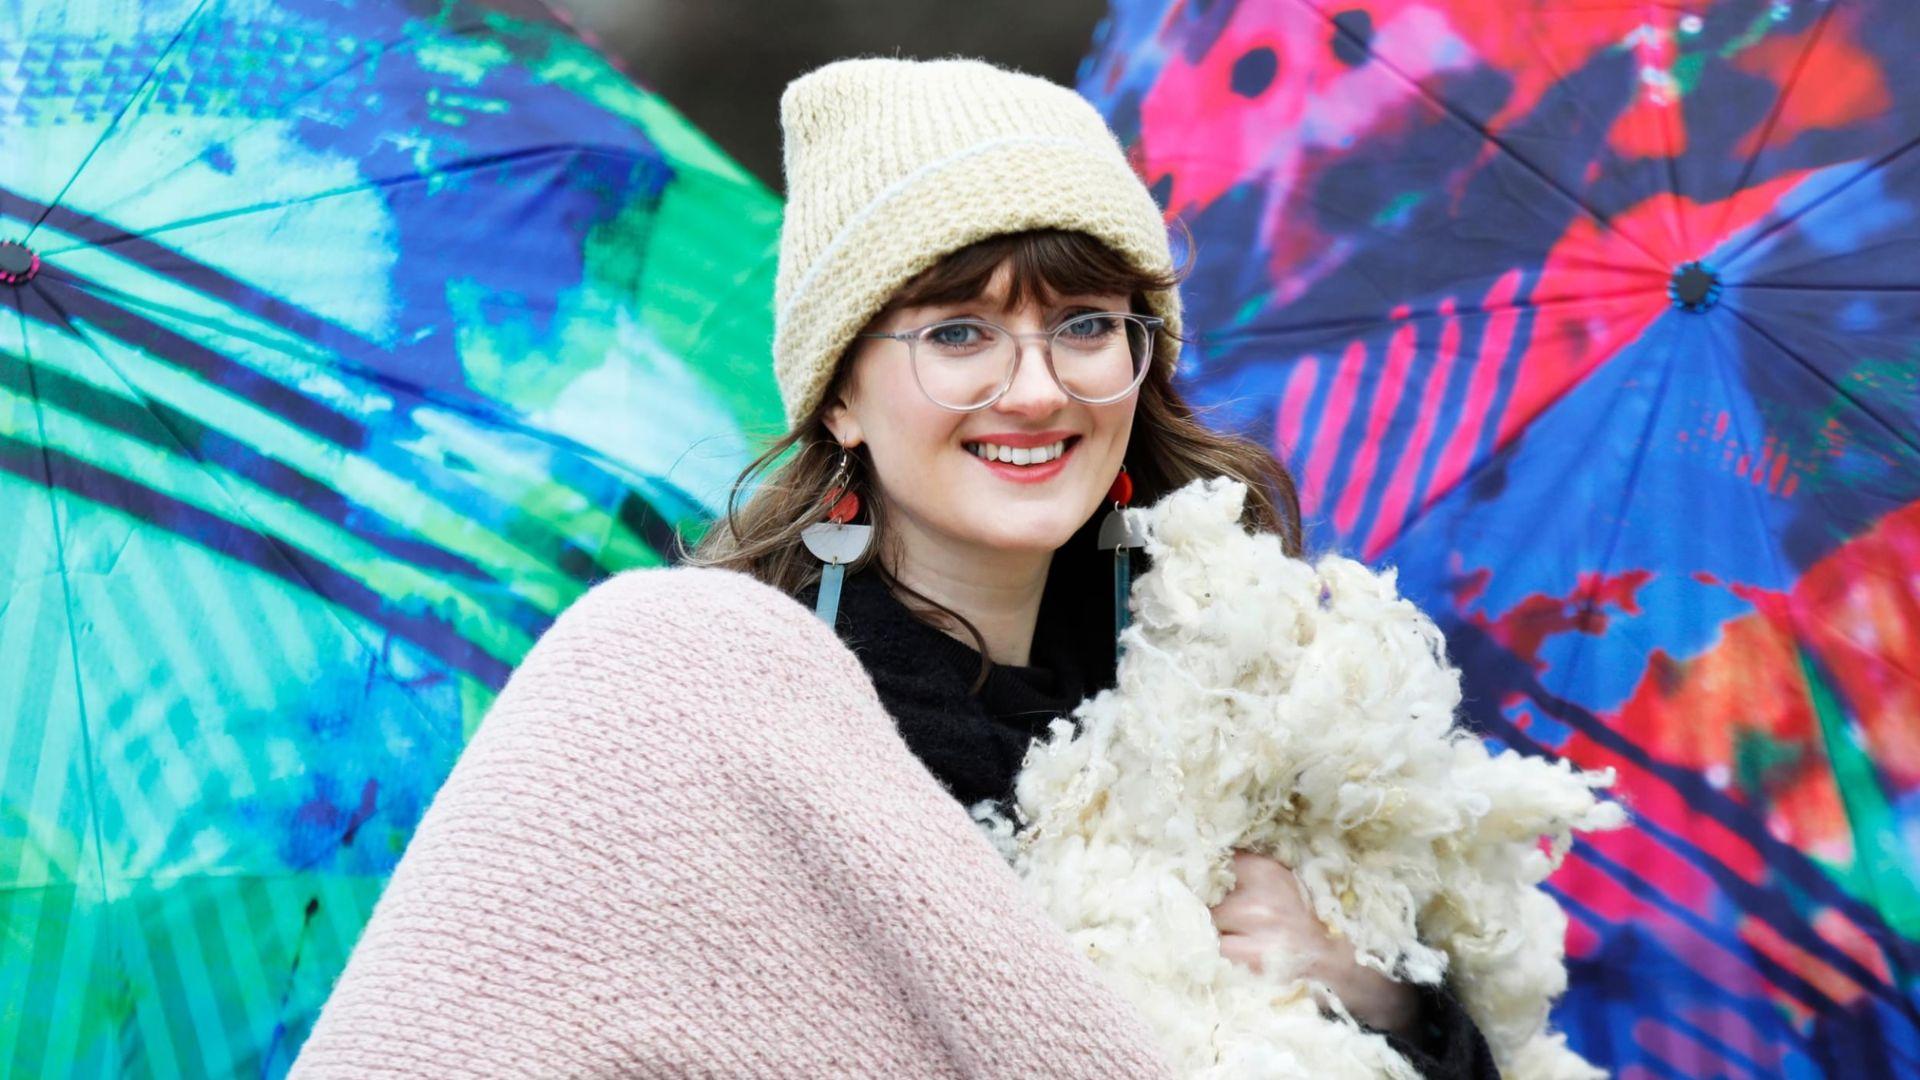 One of the judges Sophie Reynolds pictured with some of the products by designers ,Handknit wool blankets and hat from Eriu and Umbrellas by Clare O’Connell who will entre the Design at Design & Crafts Council Ireland (DCCI) Business Design Challenge competition . DCCI officially opened the public voting for this year’s Irish Business Design. Now in its third year, the Irish Business Design Challenge 2023 (IBDC) focuses on companies that have used design thinking to future proof their business by making it more sustainable and energy efficient. There is a combined prize fund of over €50,000. Visit https://www.dcci.ie/ibdc-2023 for more information and to vote on shortlisted businesses. Photo: Leon Farrell/Photocall Ireland